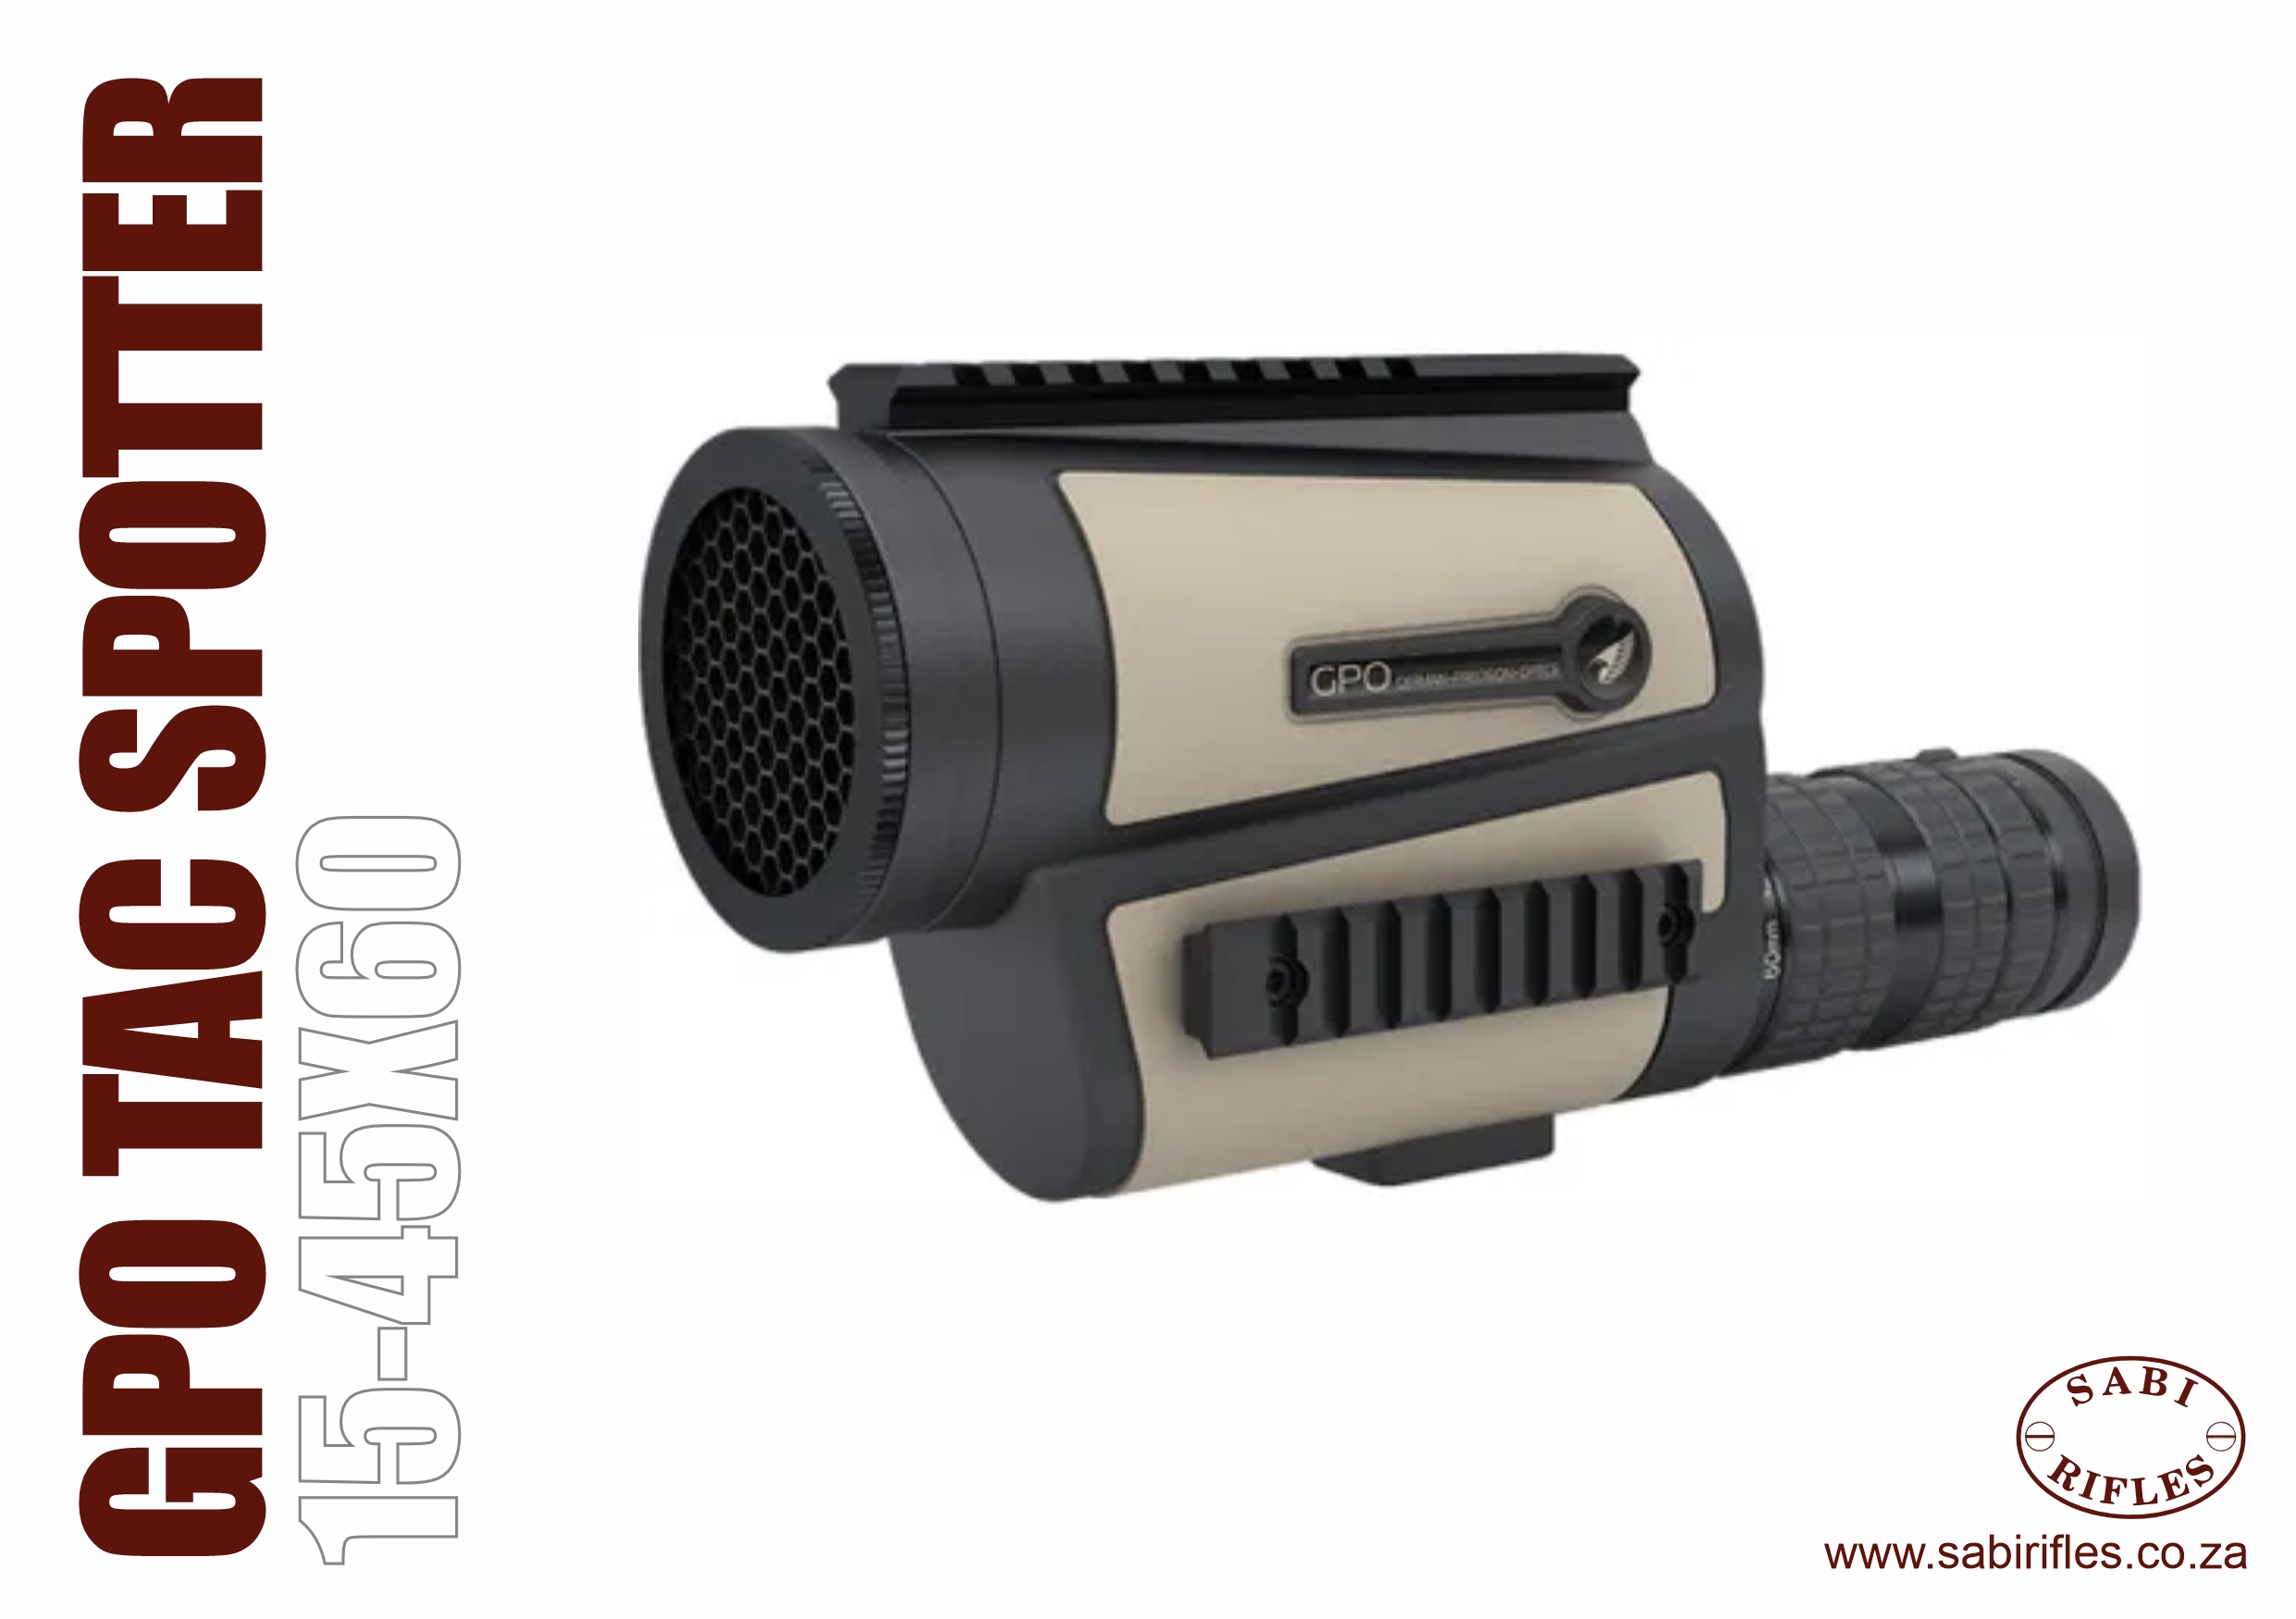 Experience precision like never before with the GPO TAC Spotter 15-45x60.   Experience precision with the GPO TAC Spotter 15-45x60. HD optics, rugged build, and versatile magnification for unmatched performance. Elevate your spotting game!